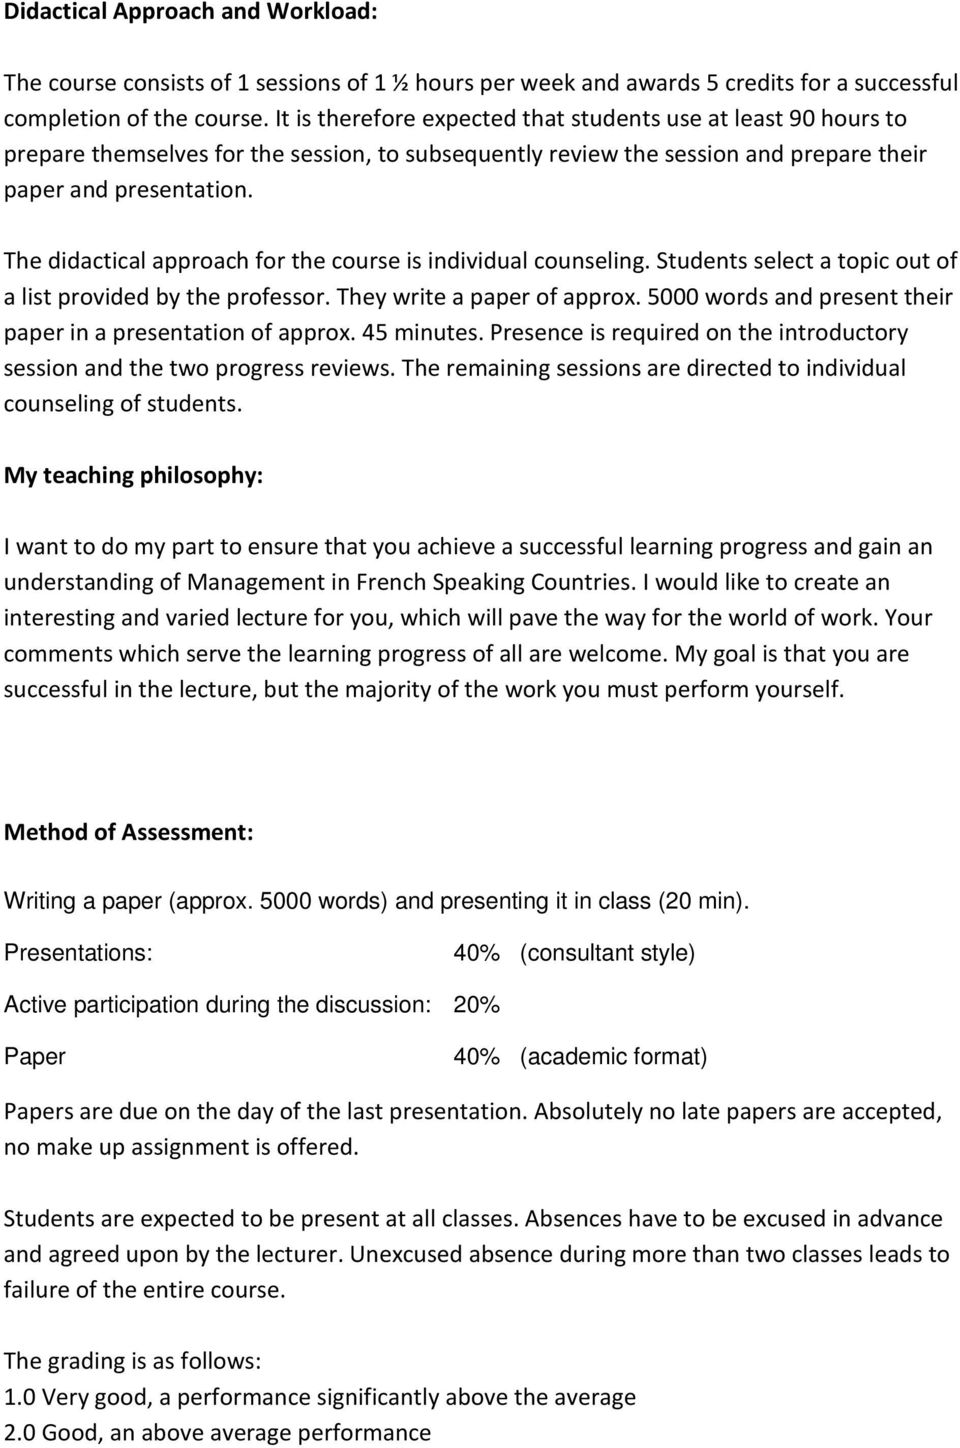 The didactical approach for the course is individual counseling. Students select a topic out of a list provided by the professor. They write a paper of approx.